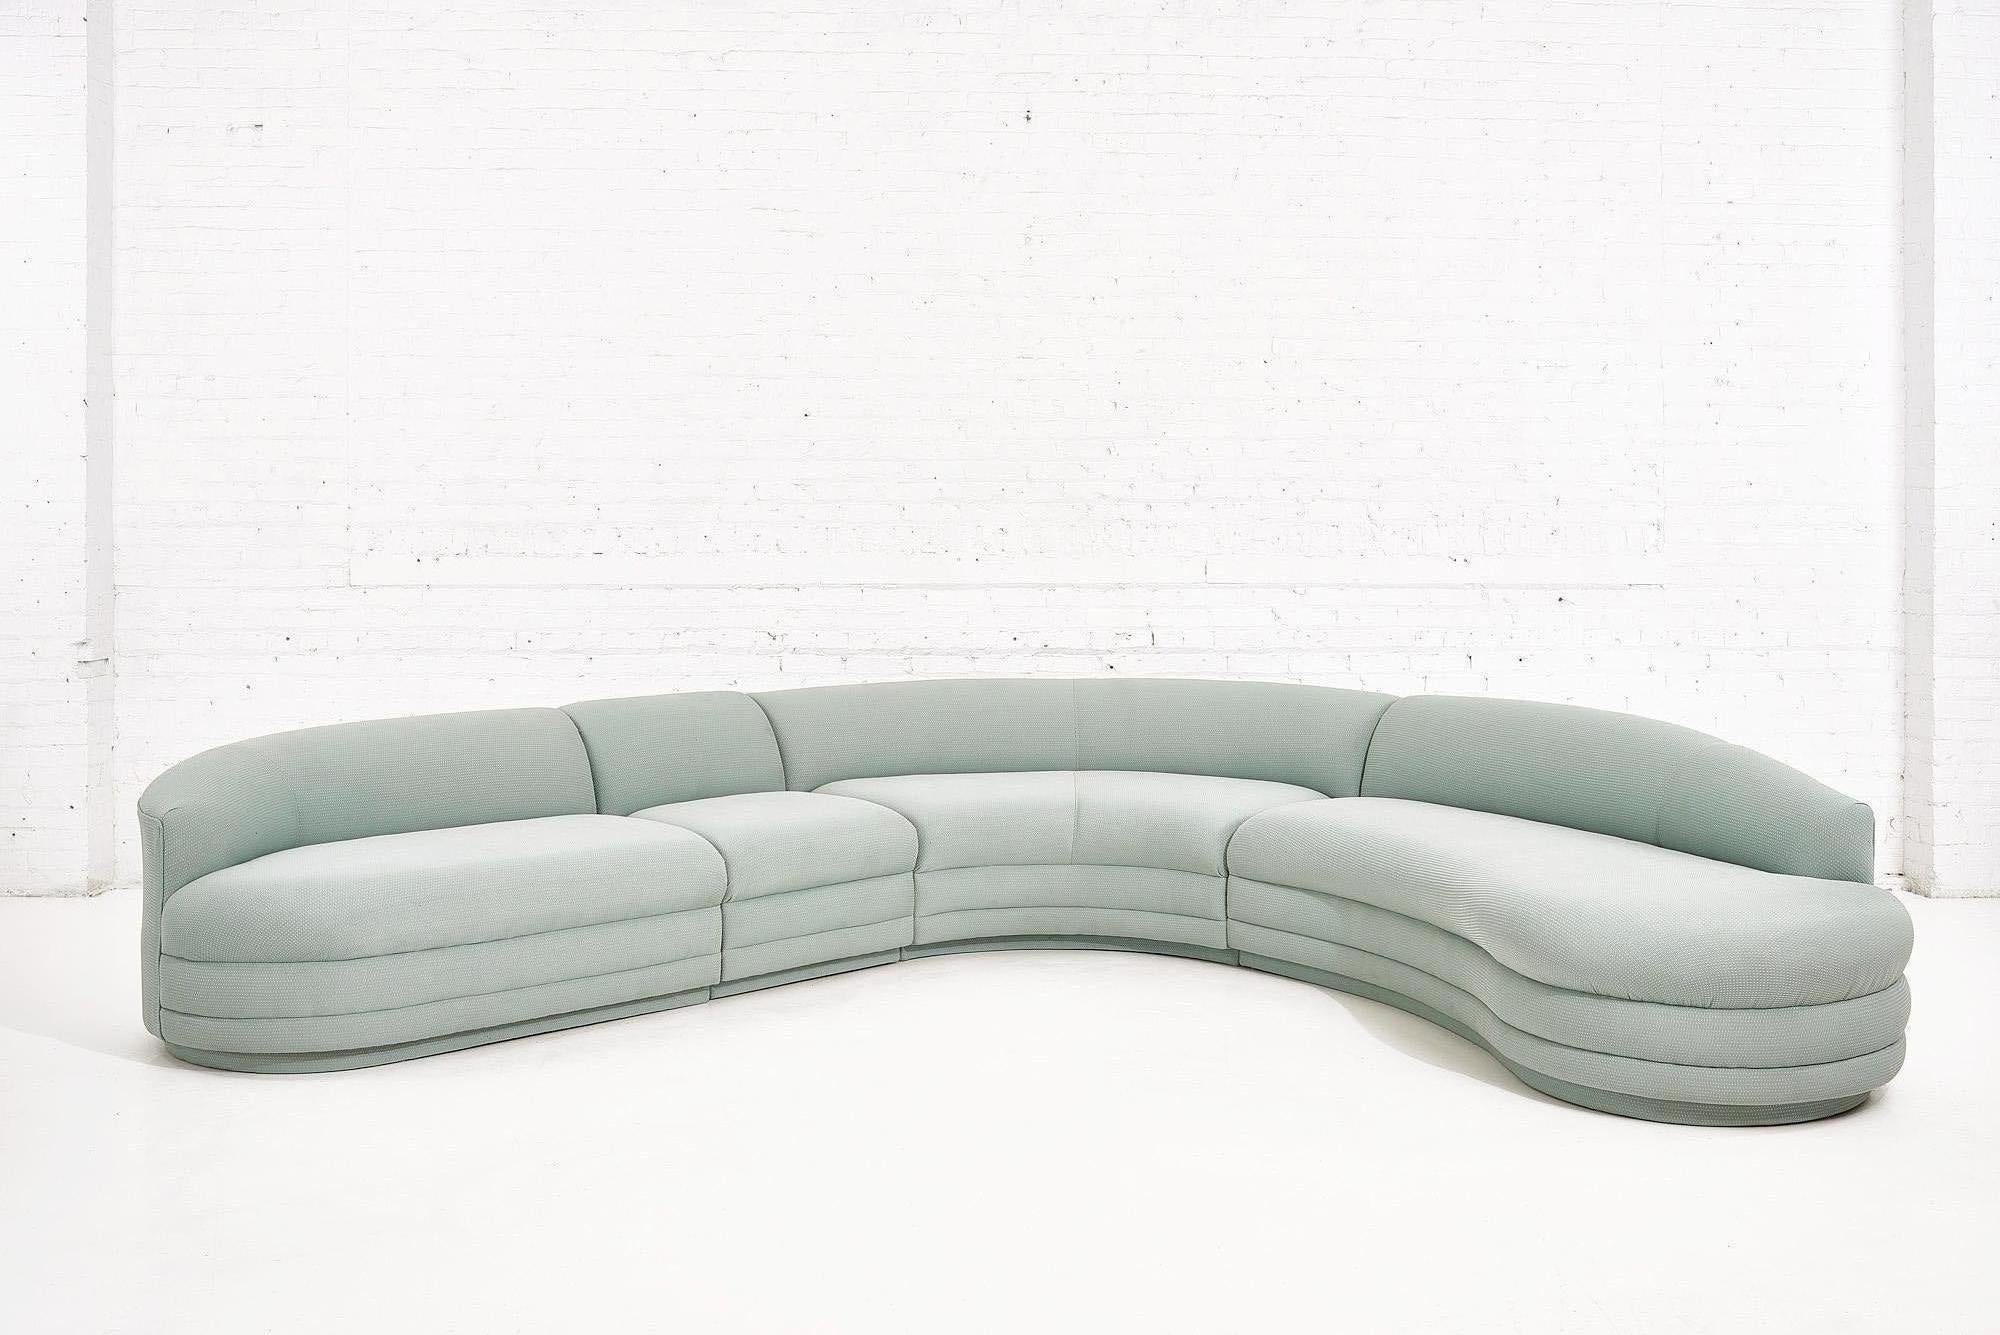 4 piece curved biomorphic sectional sofa, 1988. Designed byVladimir Kagan for Preview. Original blue/green fabric is in great condition.